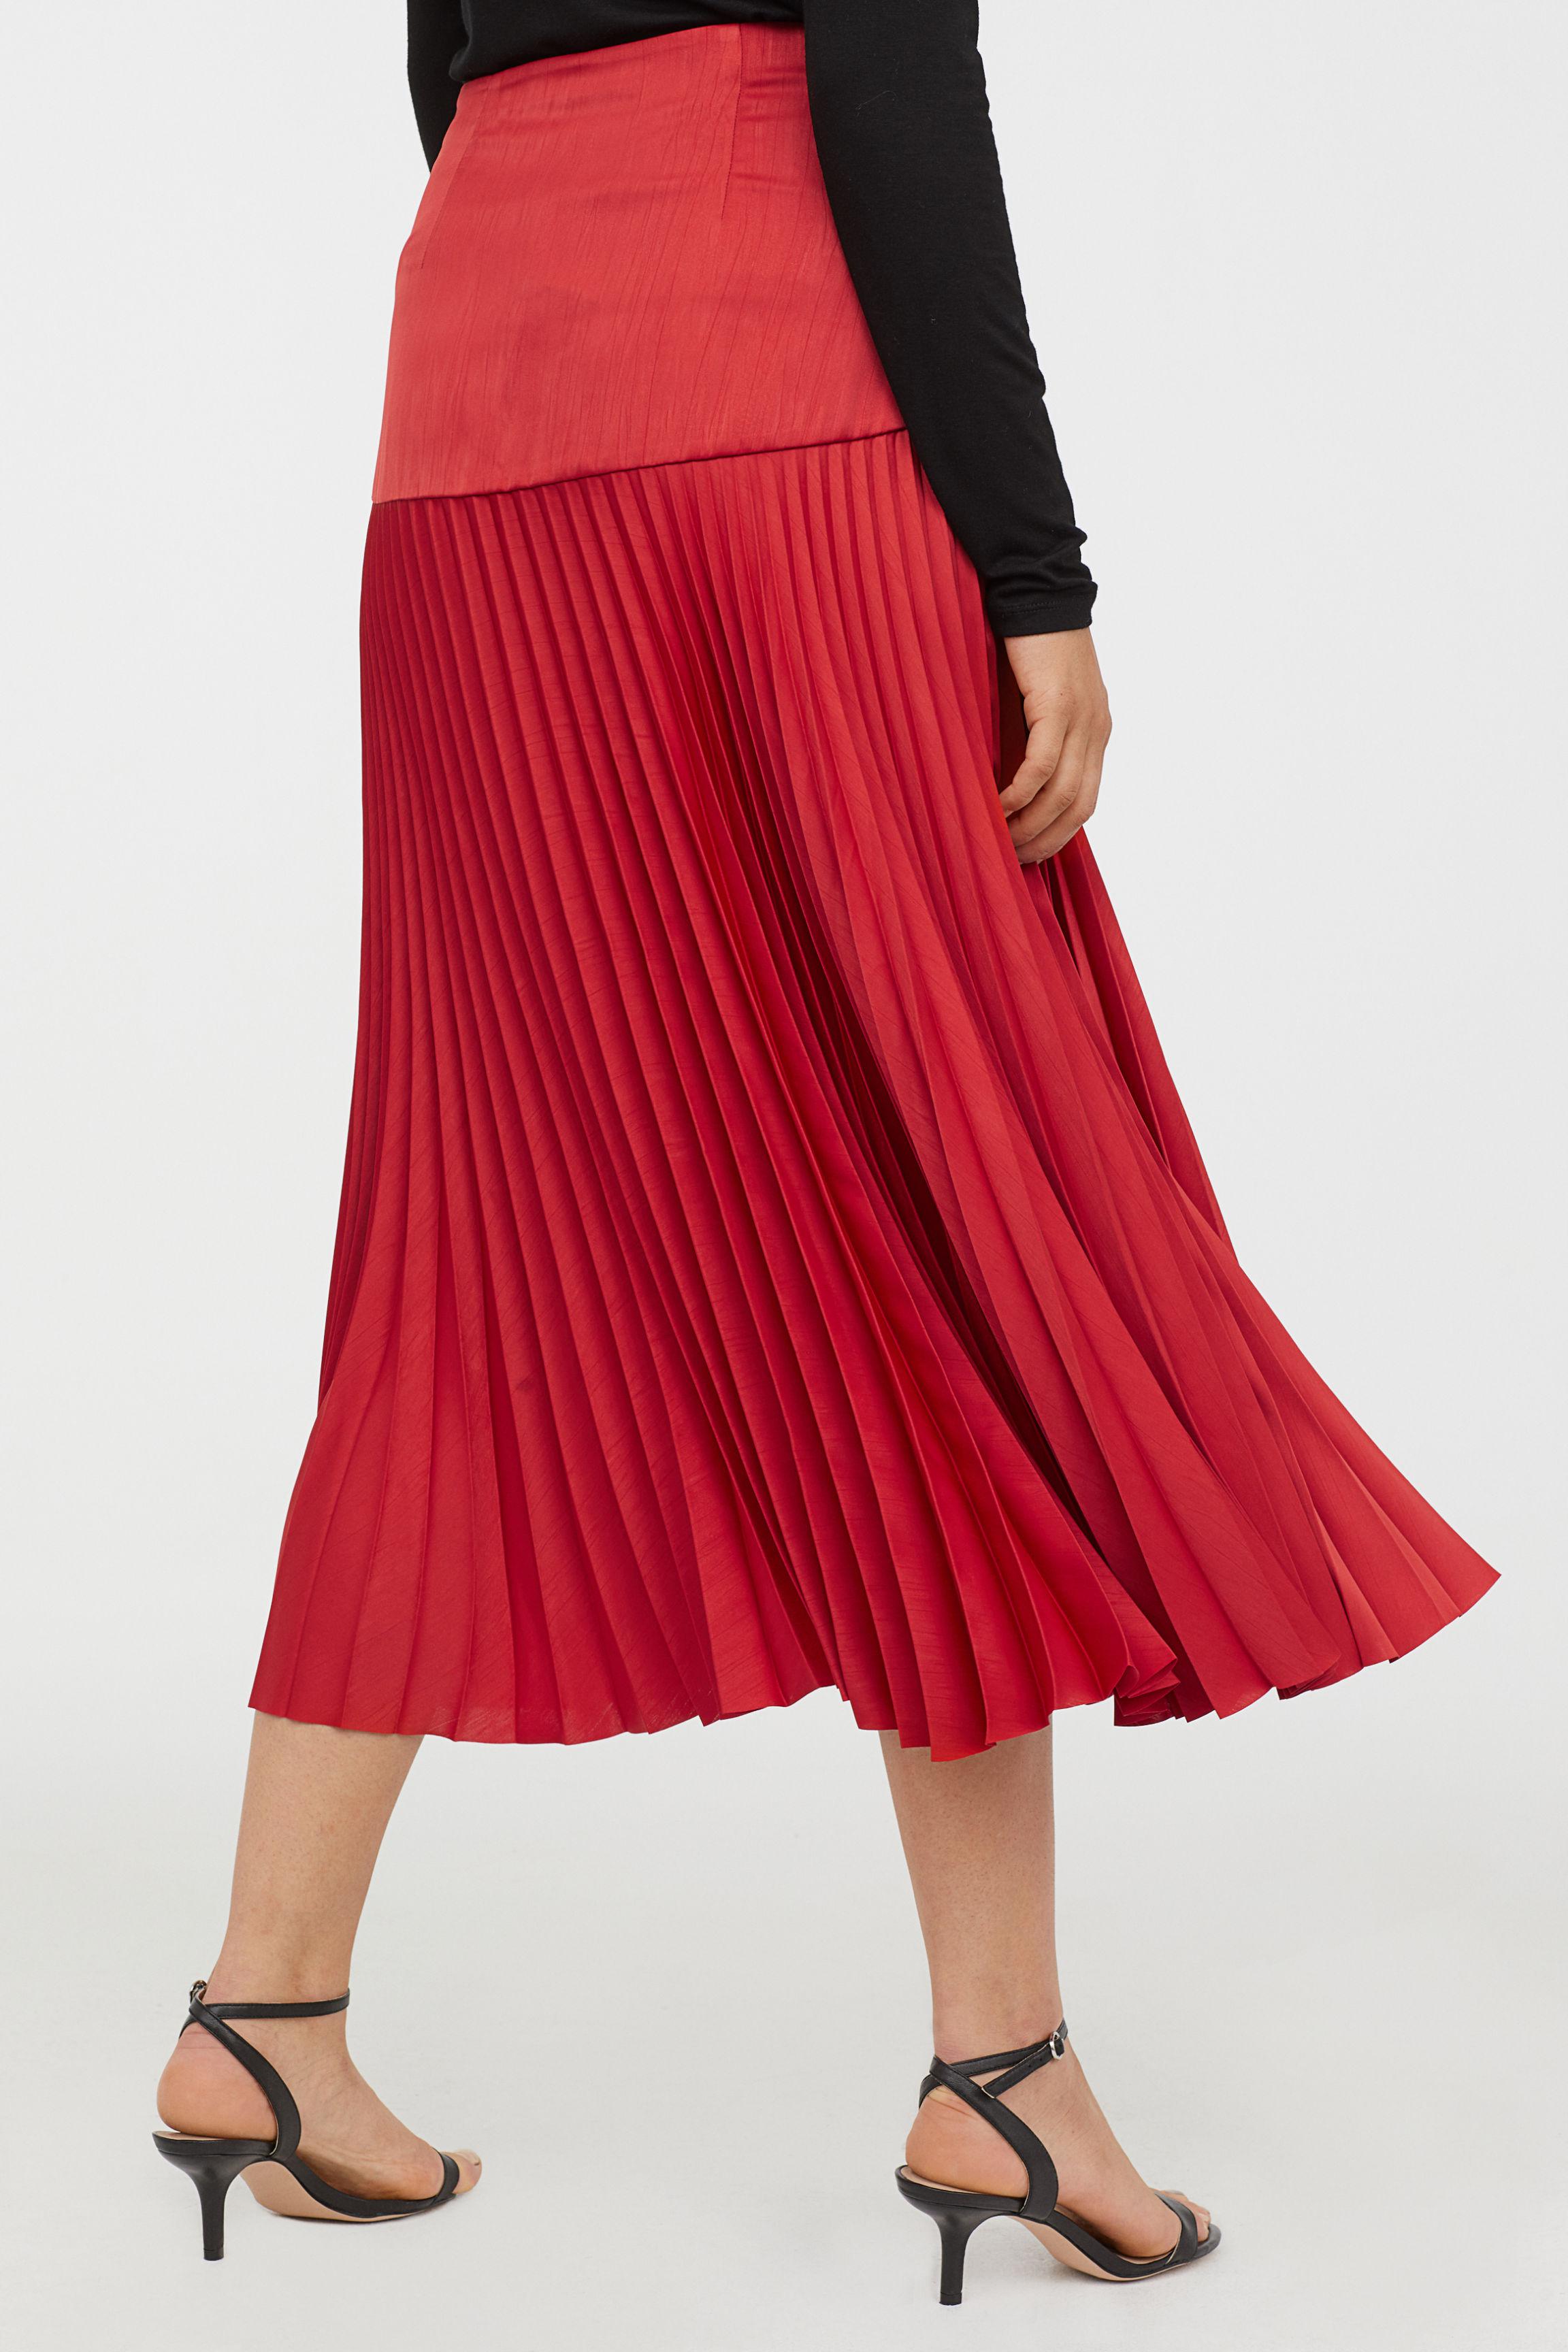 H&M Pleated Satin Skirt in Red | Lyst